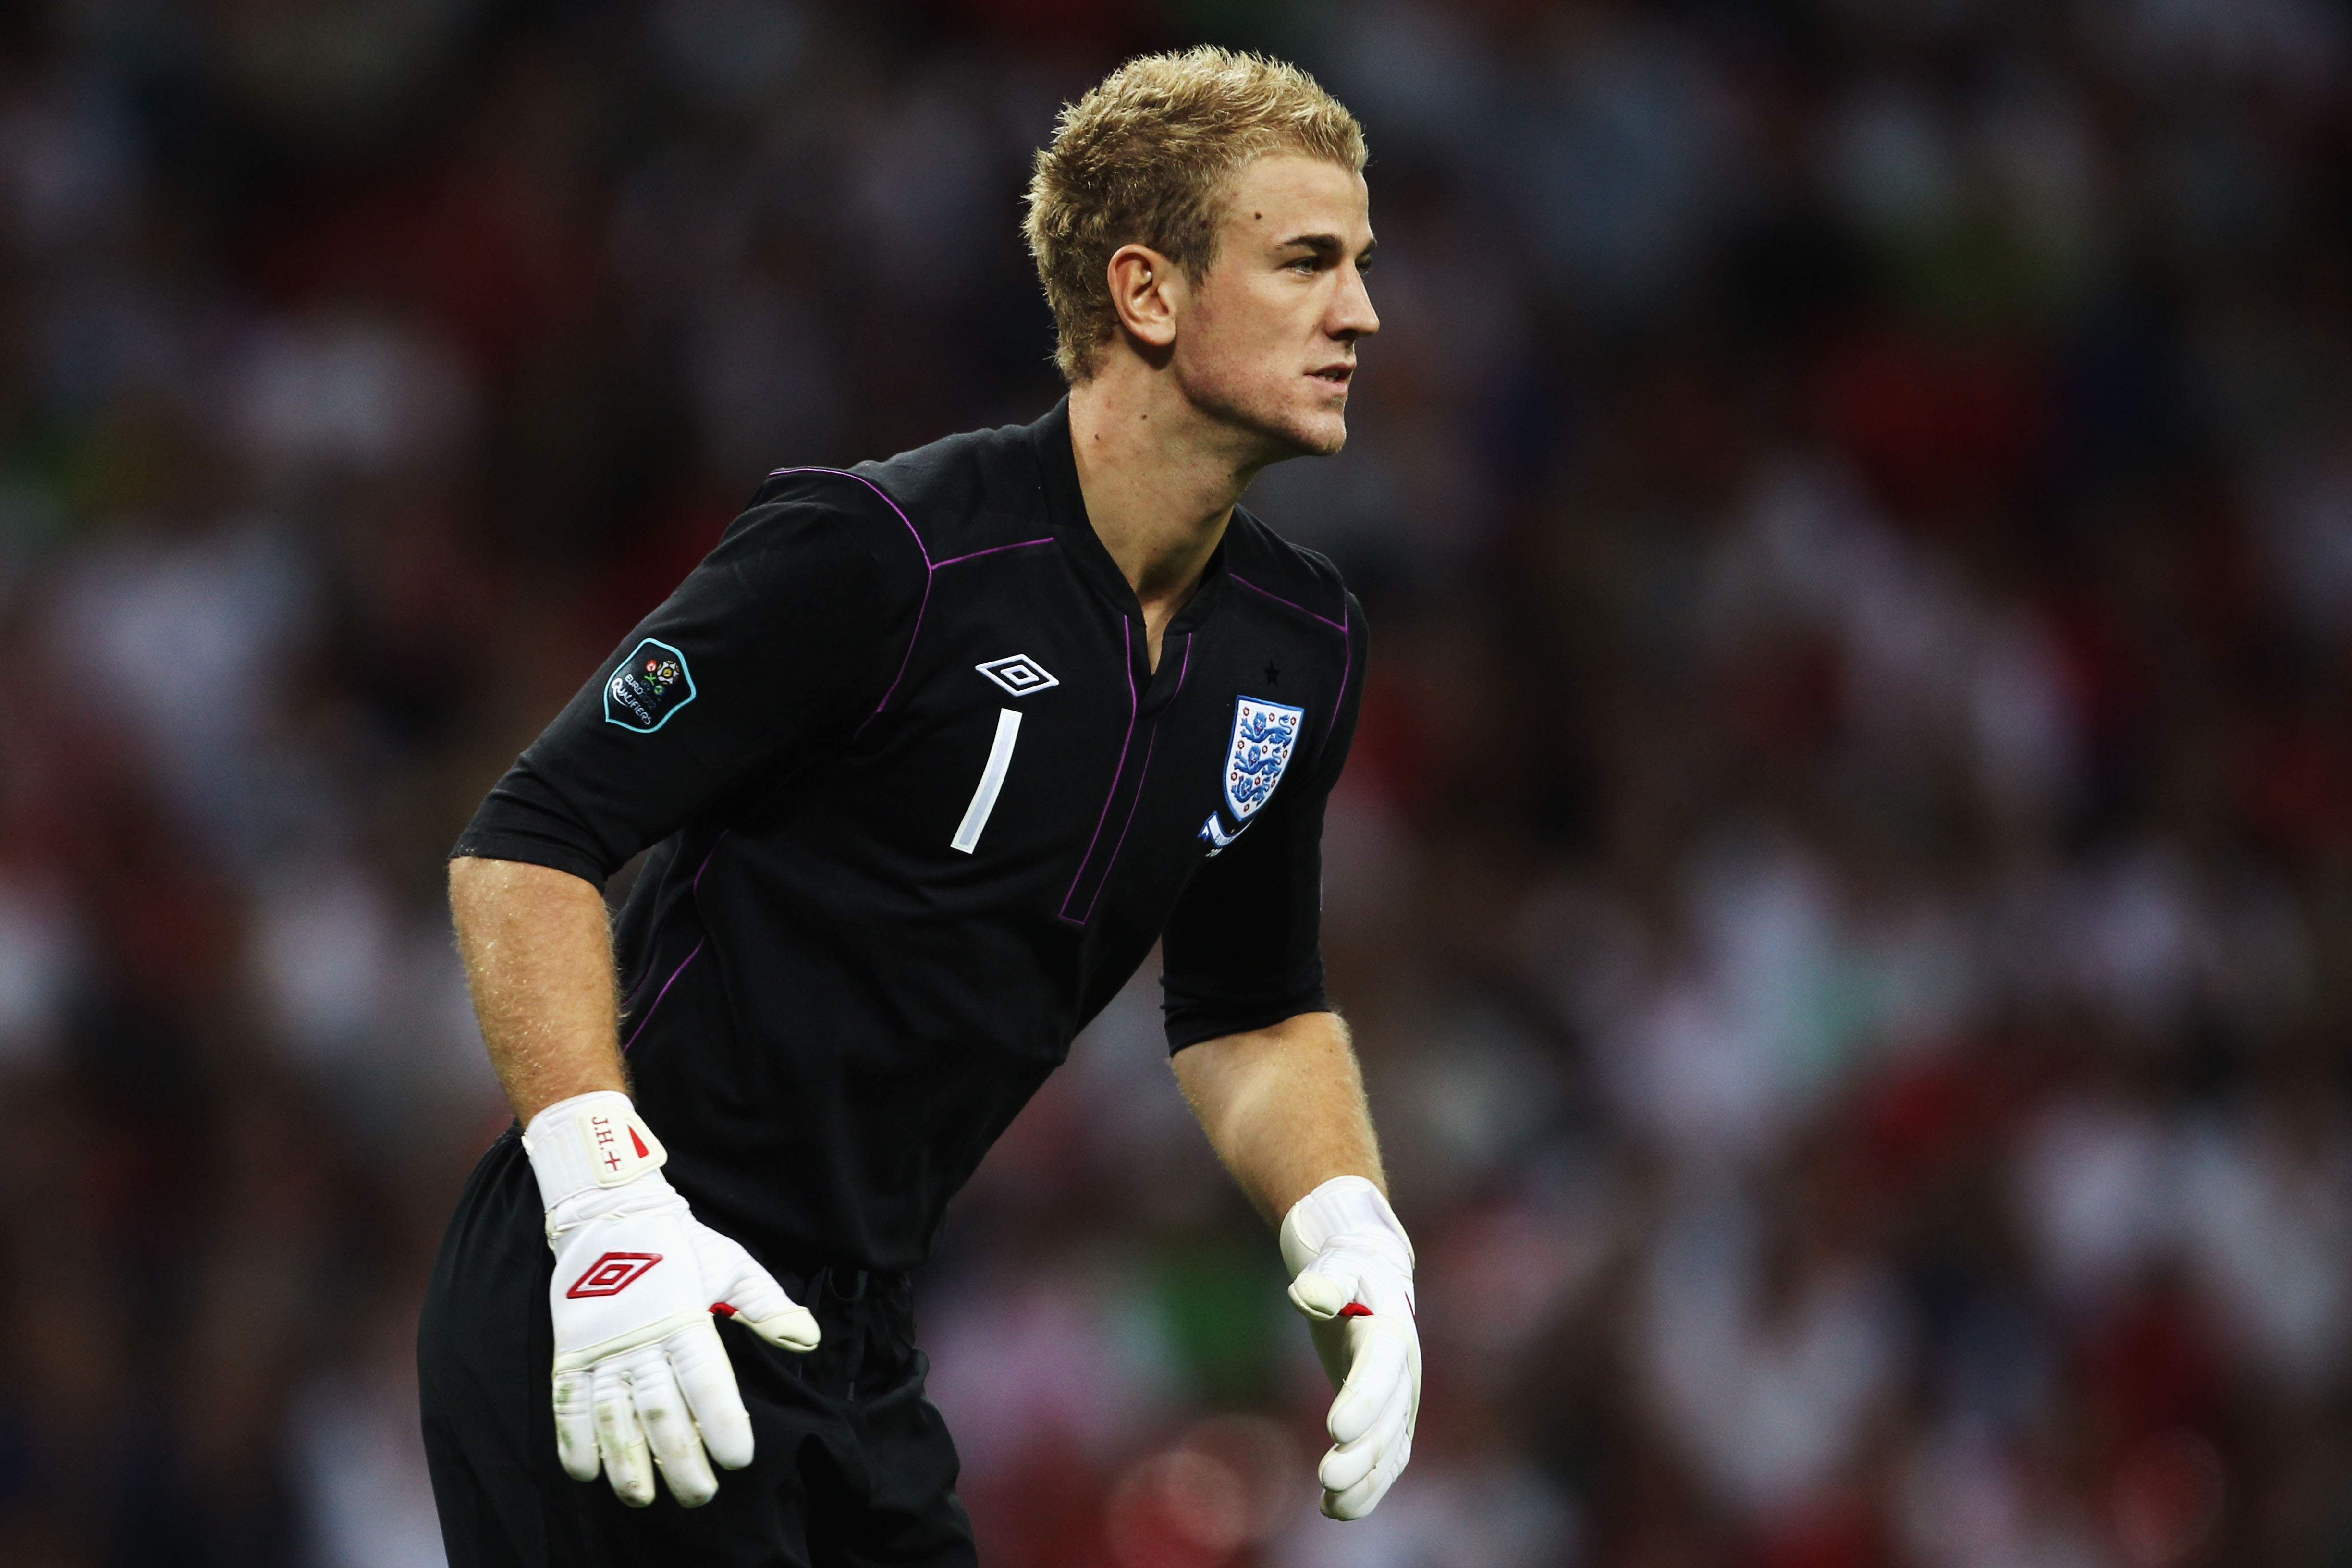 LONDON, ENGLAND - SEPTEMBER 03:  Joe Hart the England goalkeeper is seen during the UEFA EURO 2012 Group G Qualifying match between England and Bulgaria at Wembley Stadium on September 3, 2010 in London, England.  (Photo by Bryn Lennon/Getty Images)